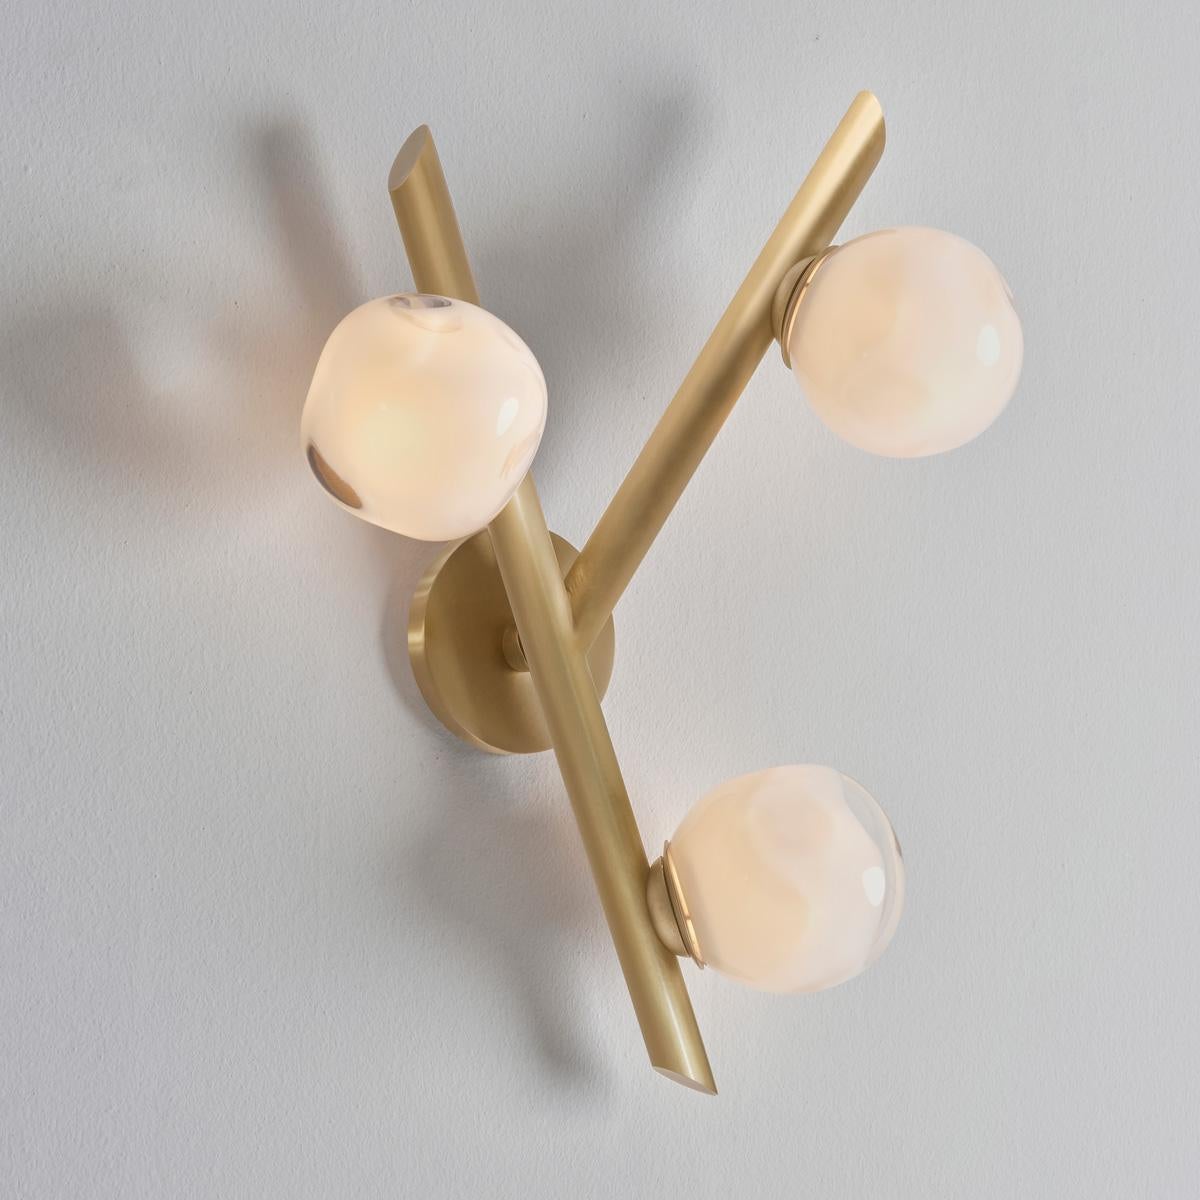 The Antares wall light harmoniously balances the linear details of its intersecting arms with the organic form of its handblown glass shades. The first images show the fixture in our satin brass finish-subsequent pictures show it in a selection of